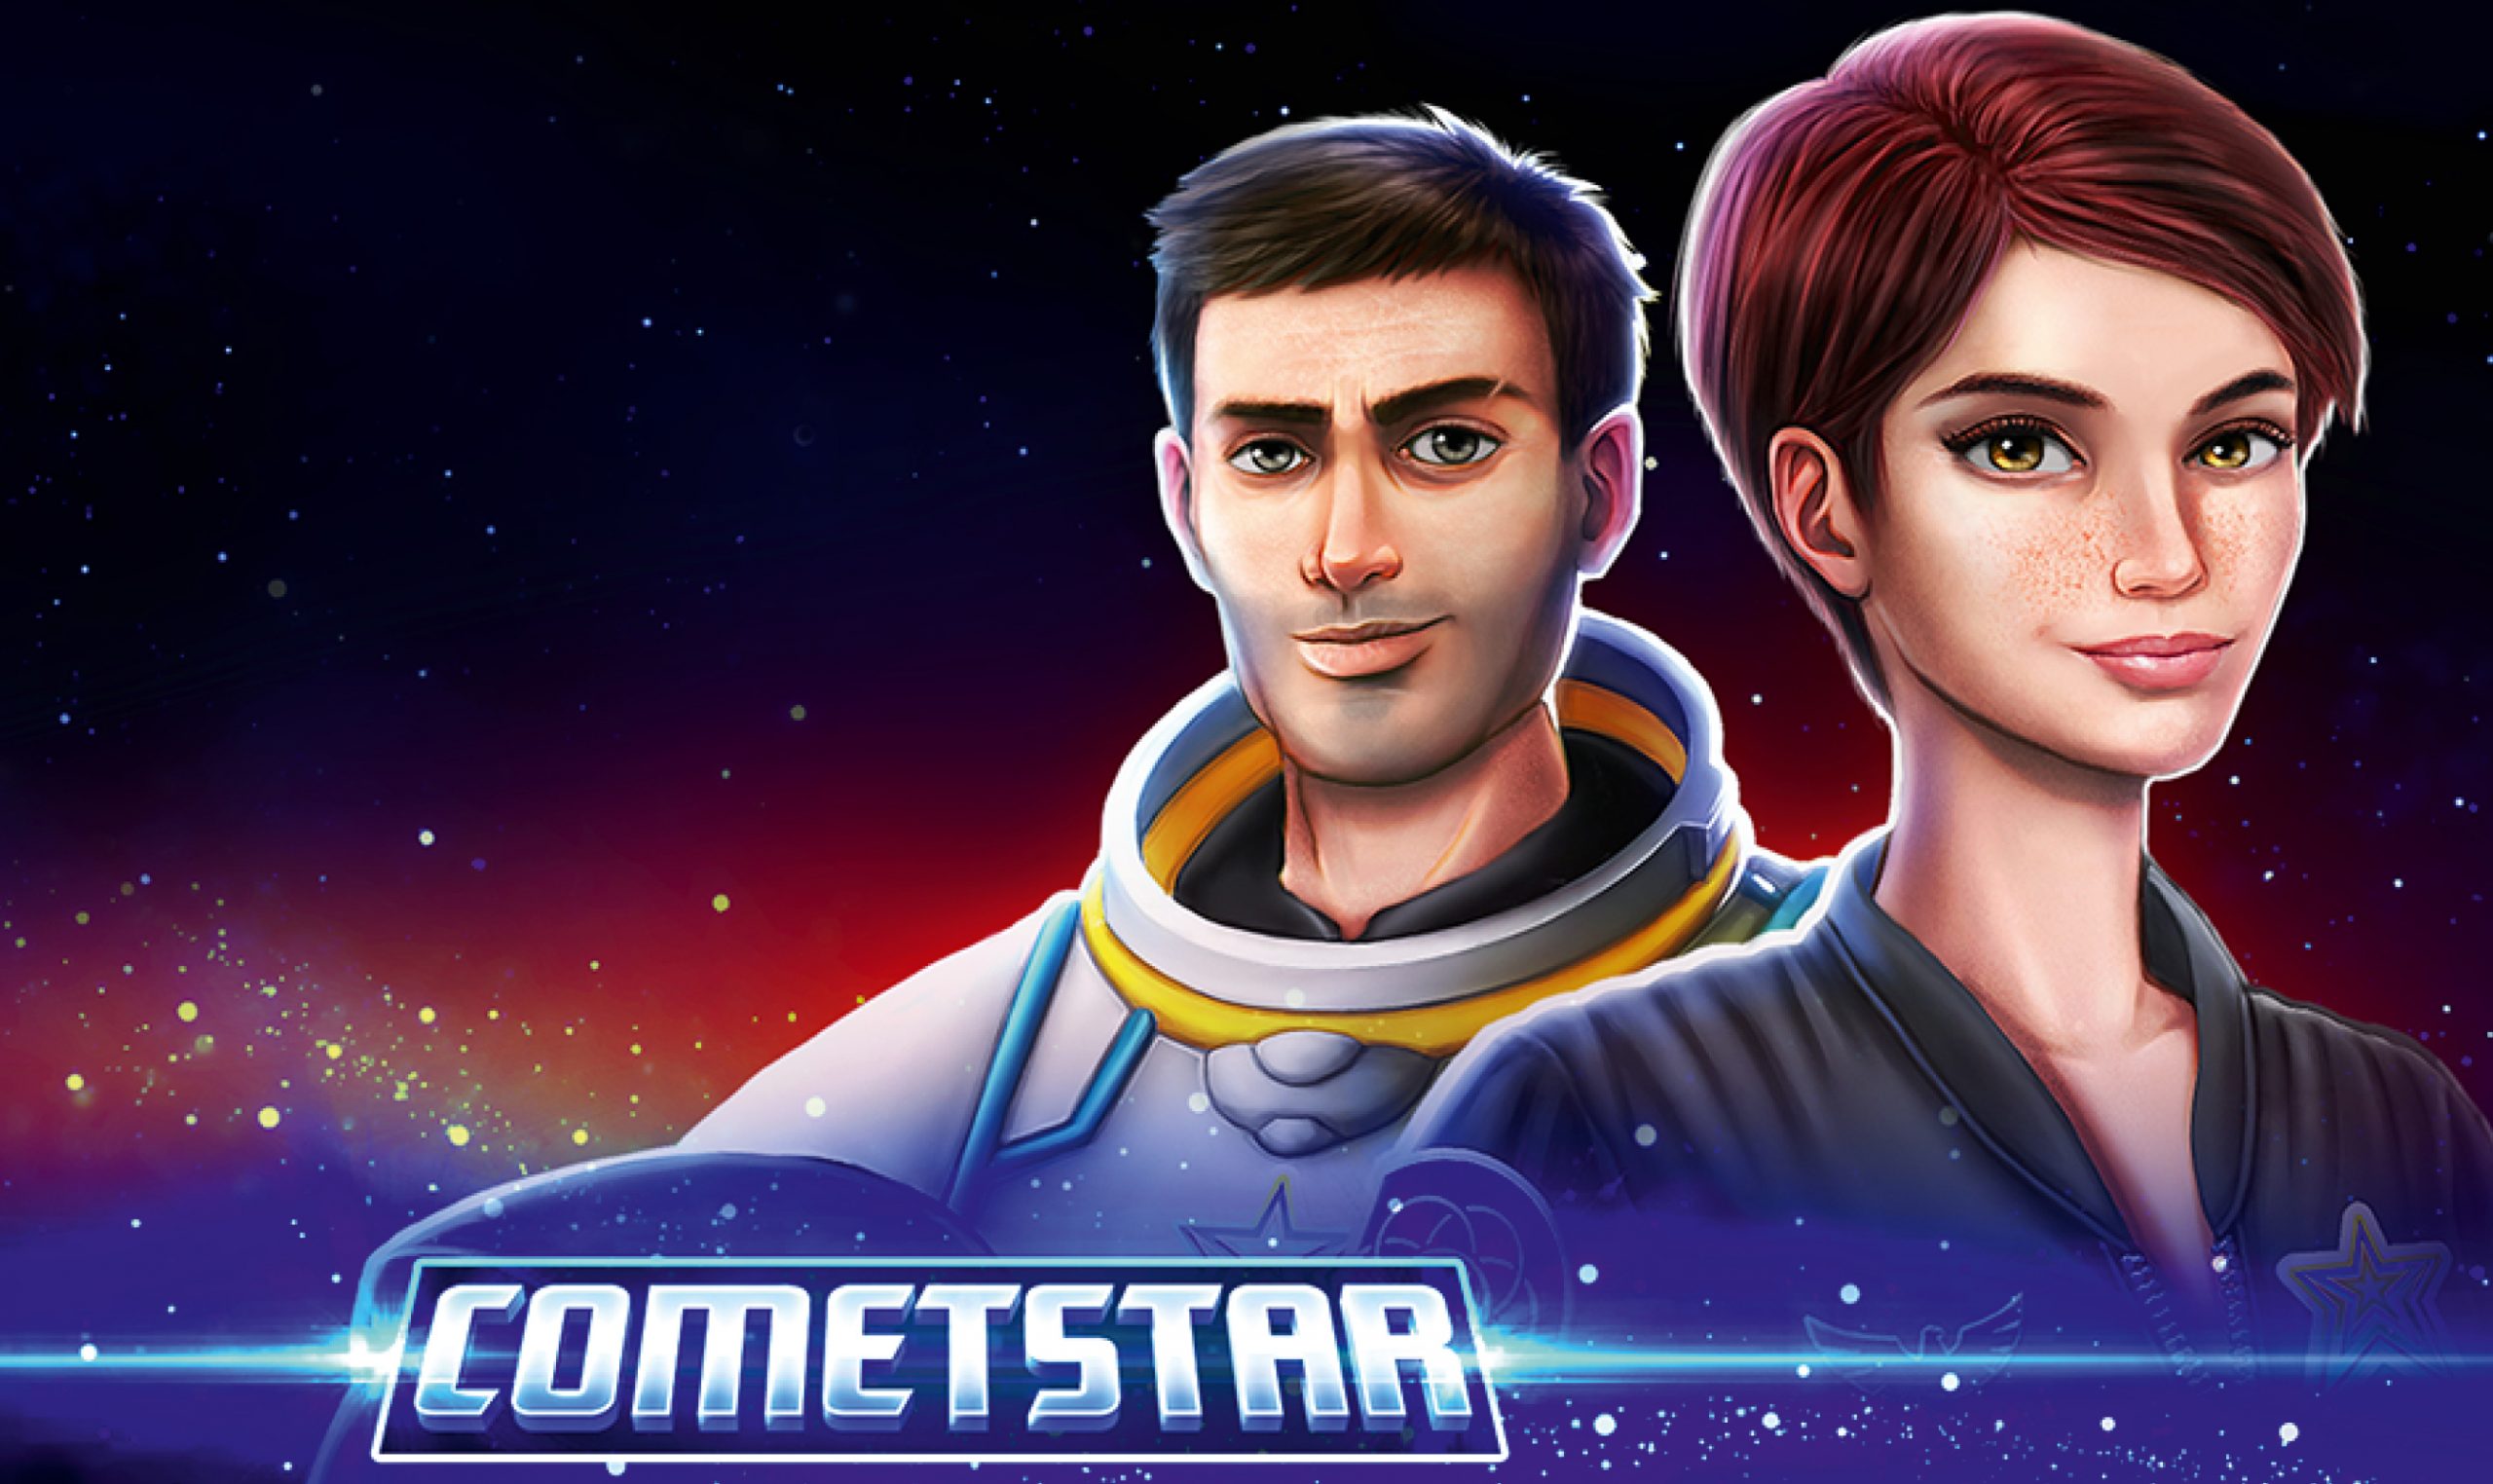 Go on a space mission with frozen wilds thanks to CometStar on betFIRST Casino